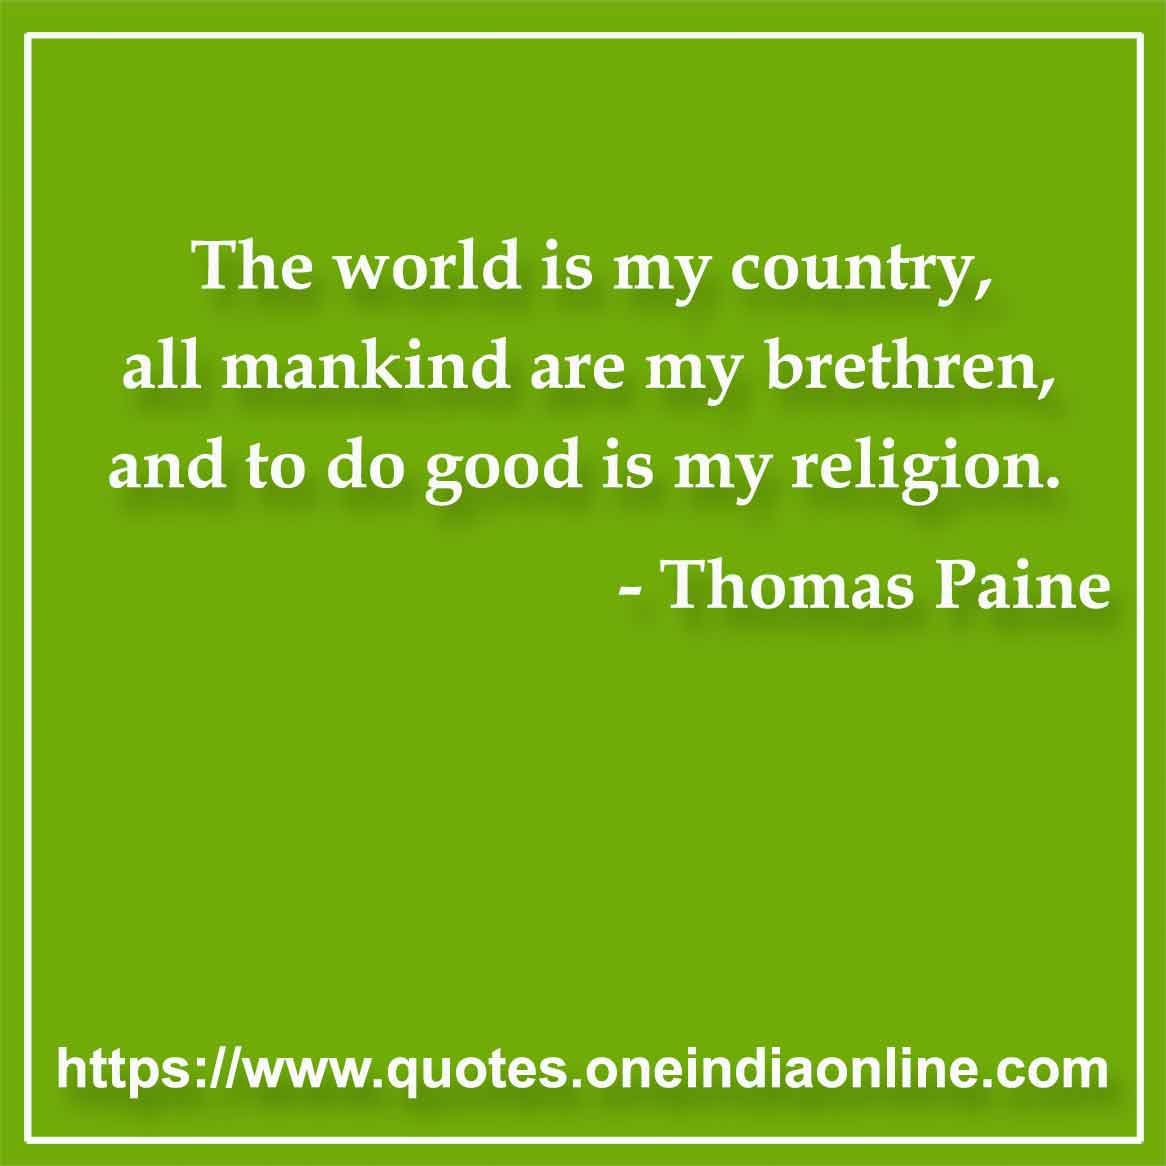 The world is my country, all mankind are my brethren, and to do good is my religion.